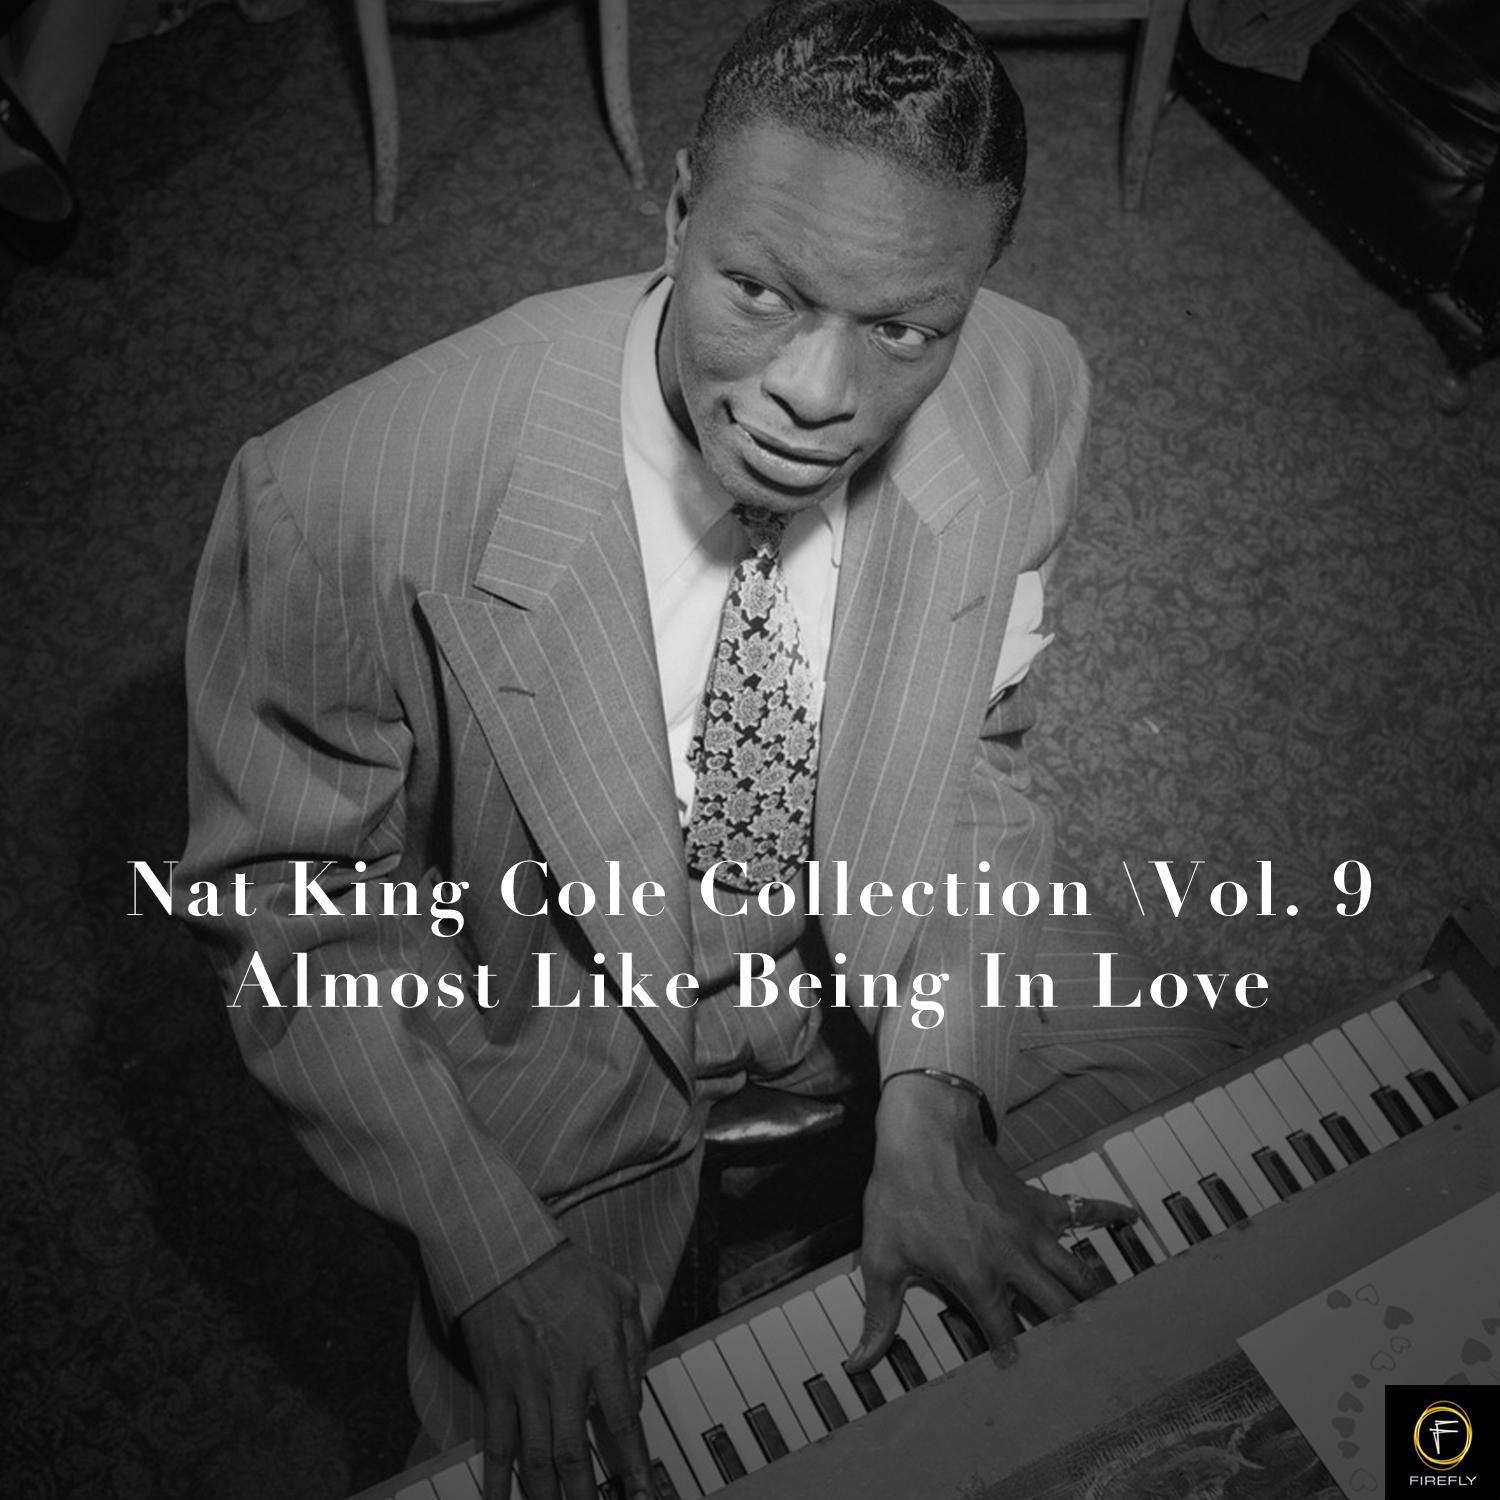 Nat King Cole Collection, Vol. 9: Almost Like Being in Love